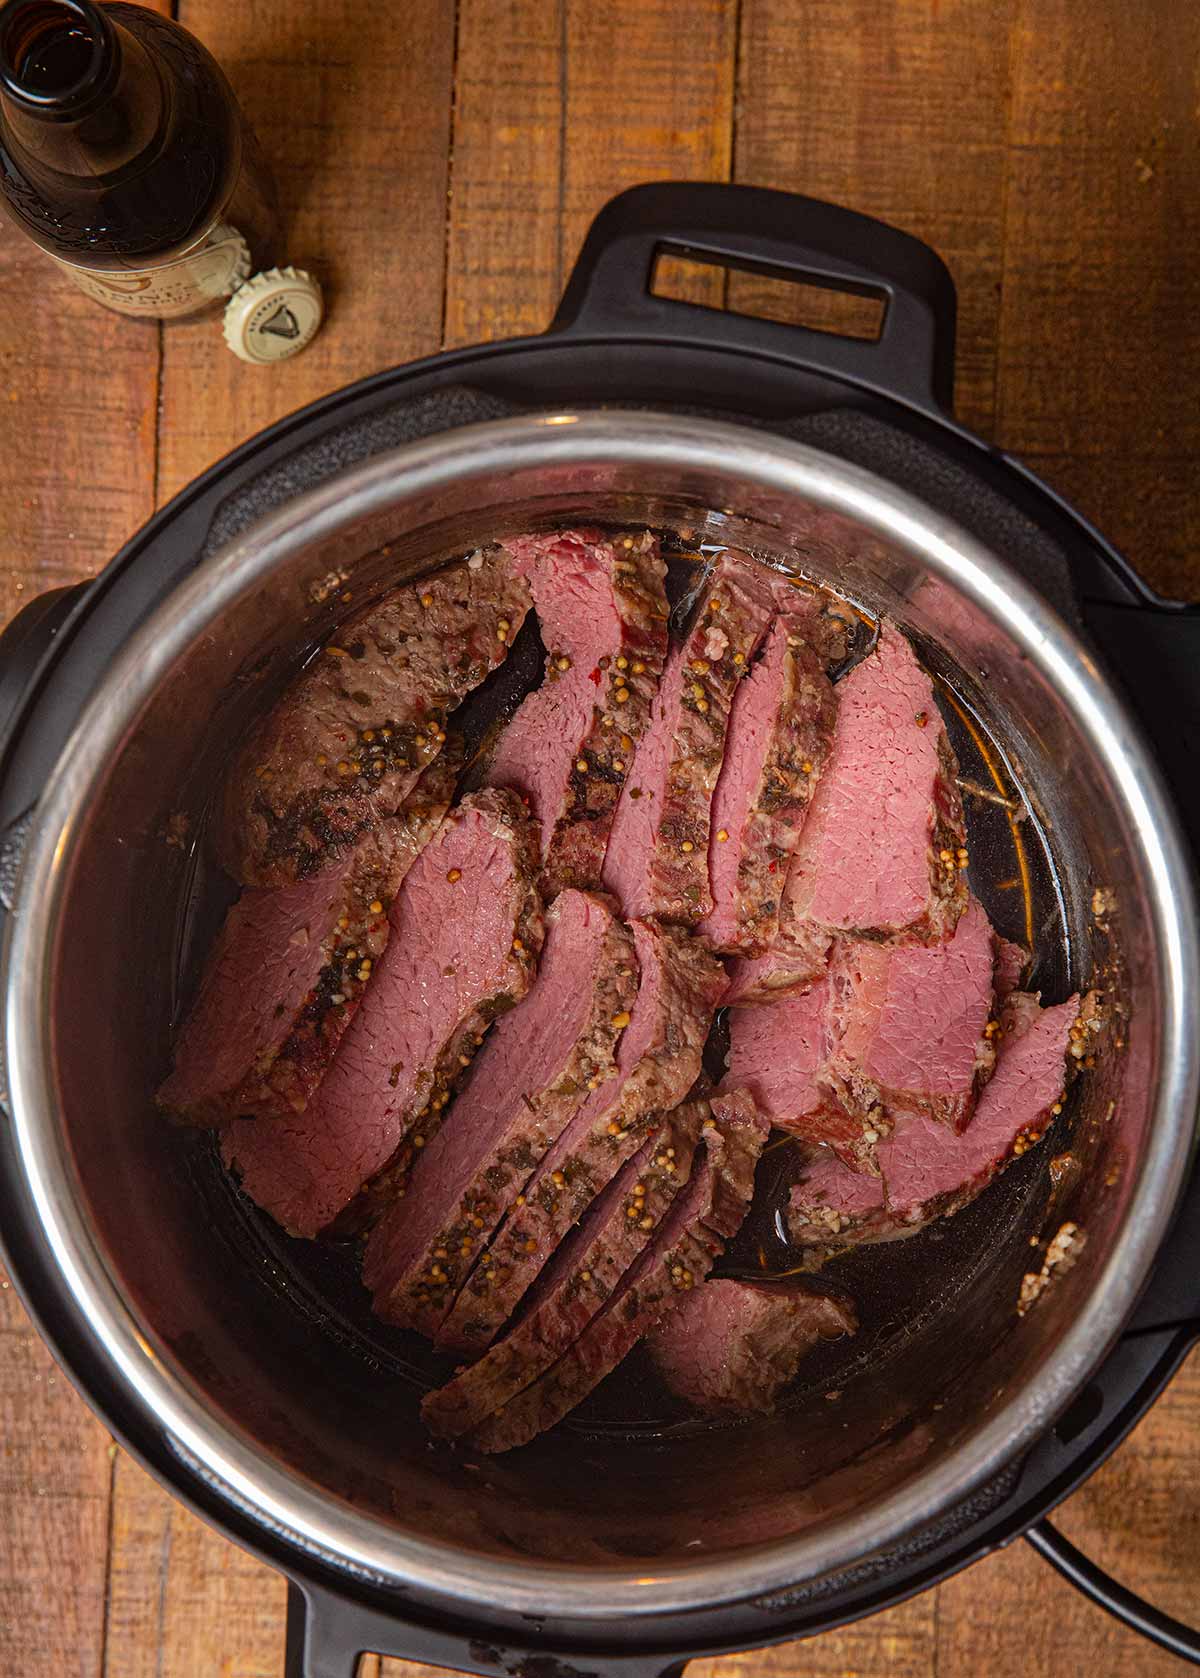 How To Cook Corned Beef In Cusinart Electric Pressure Cooker